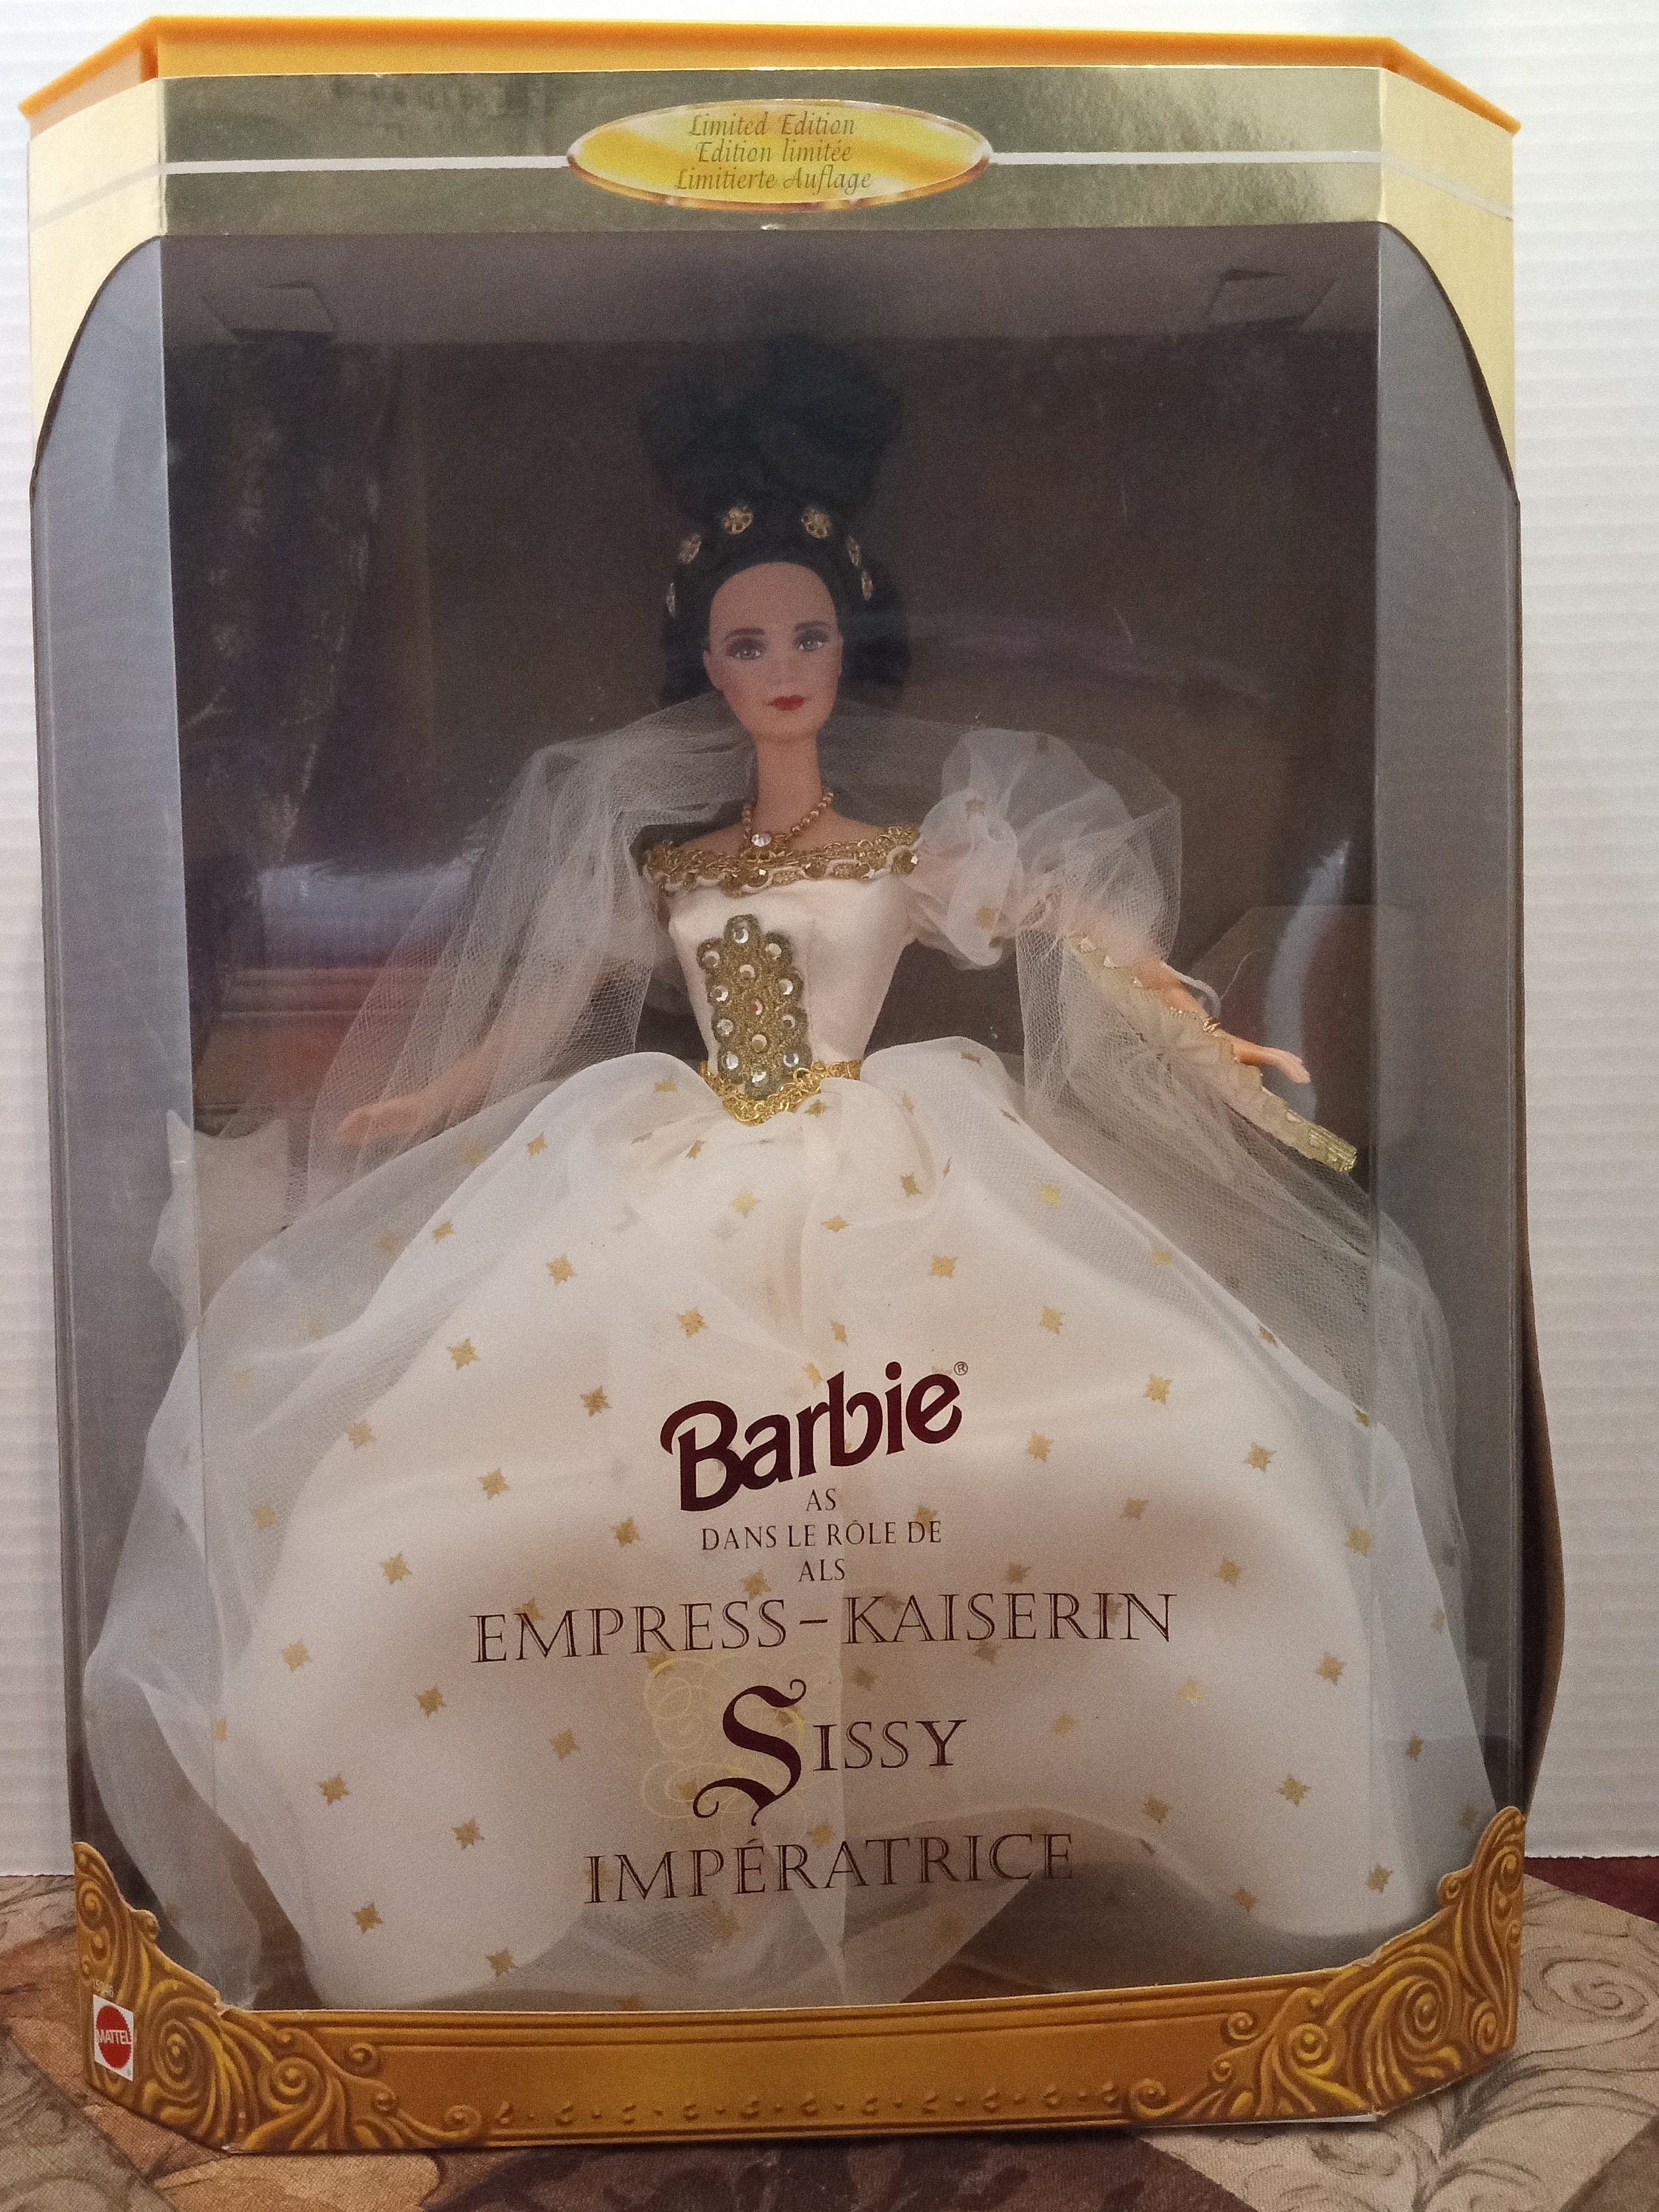 Barbie as Empress Imperatrice - Etsy